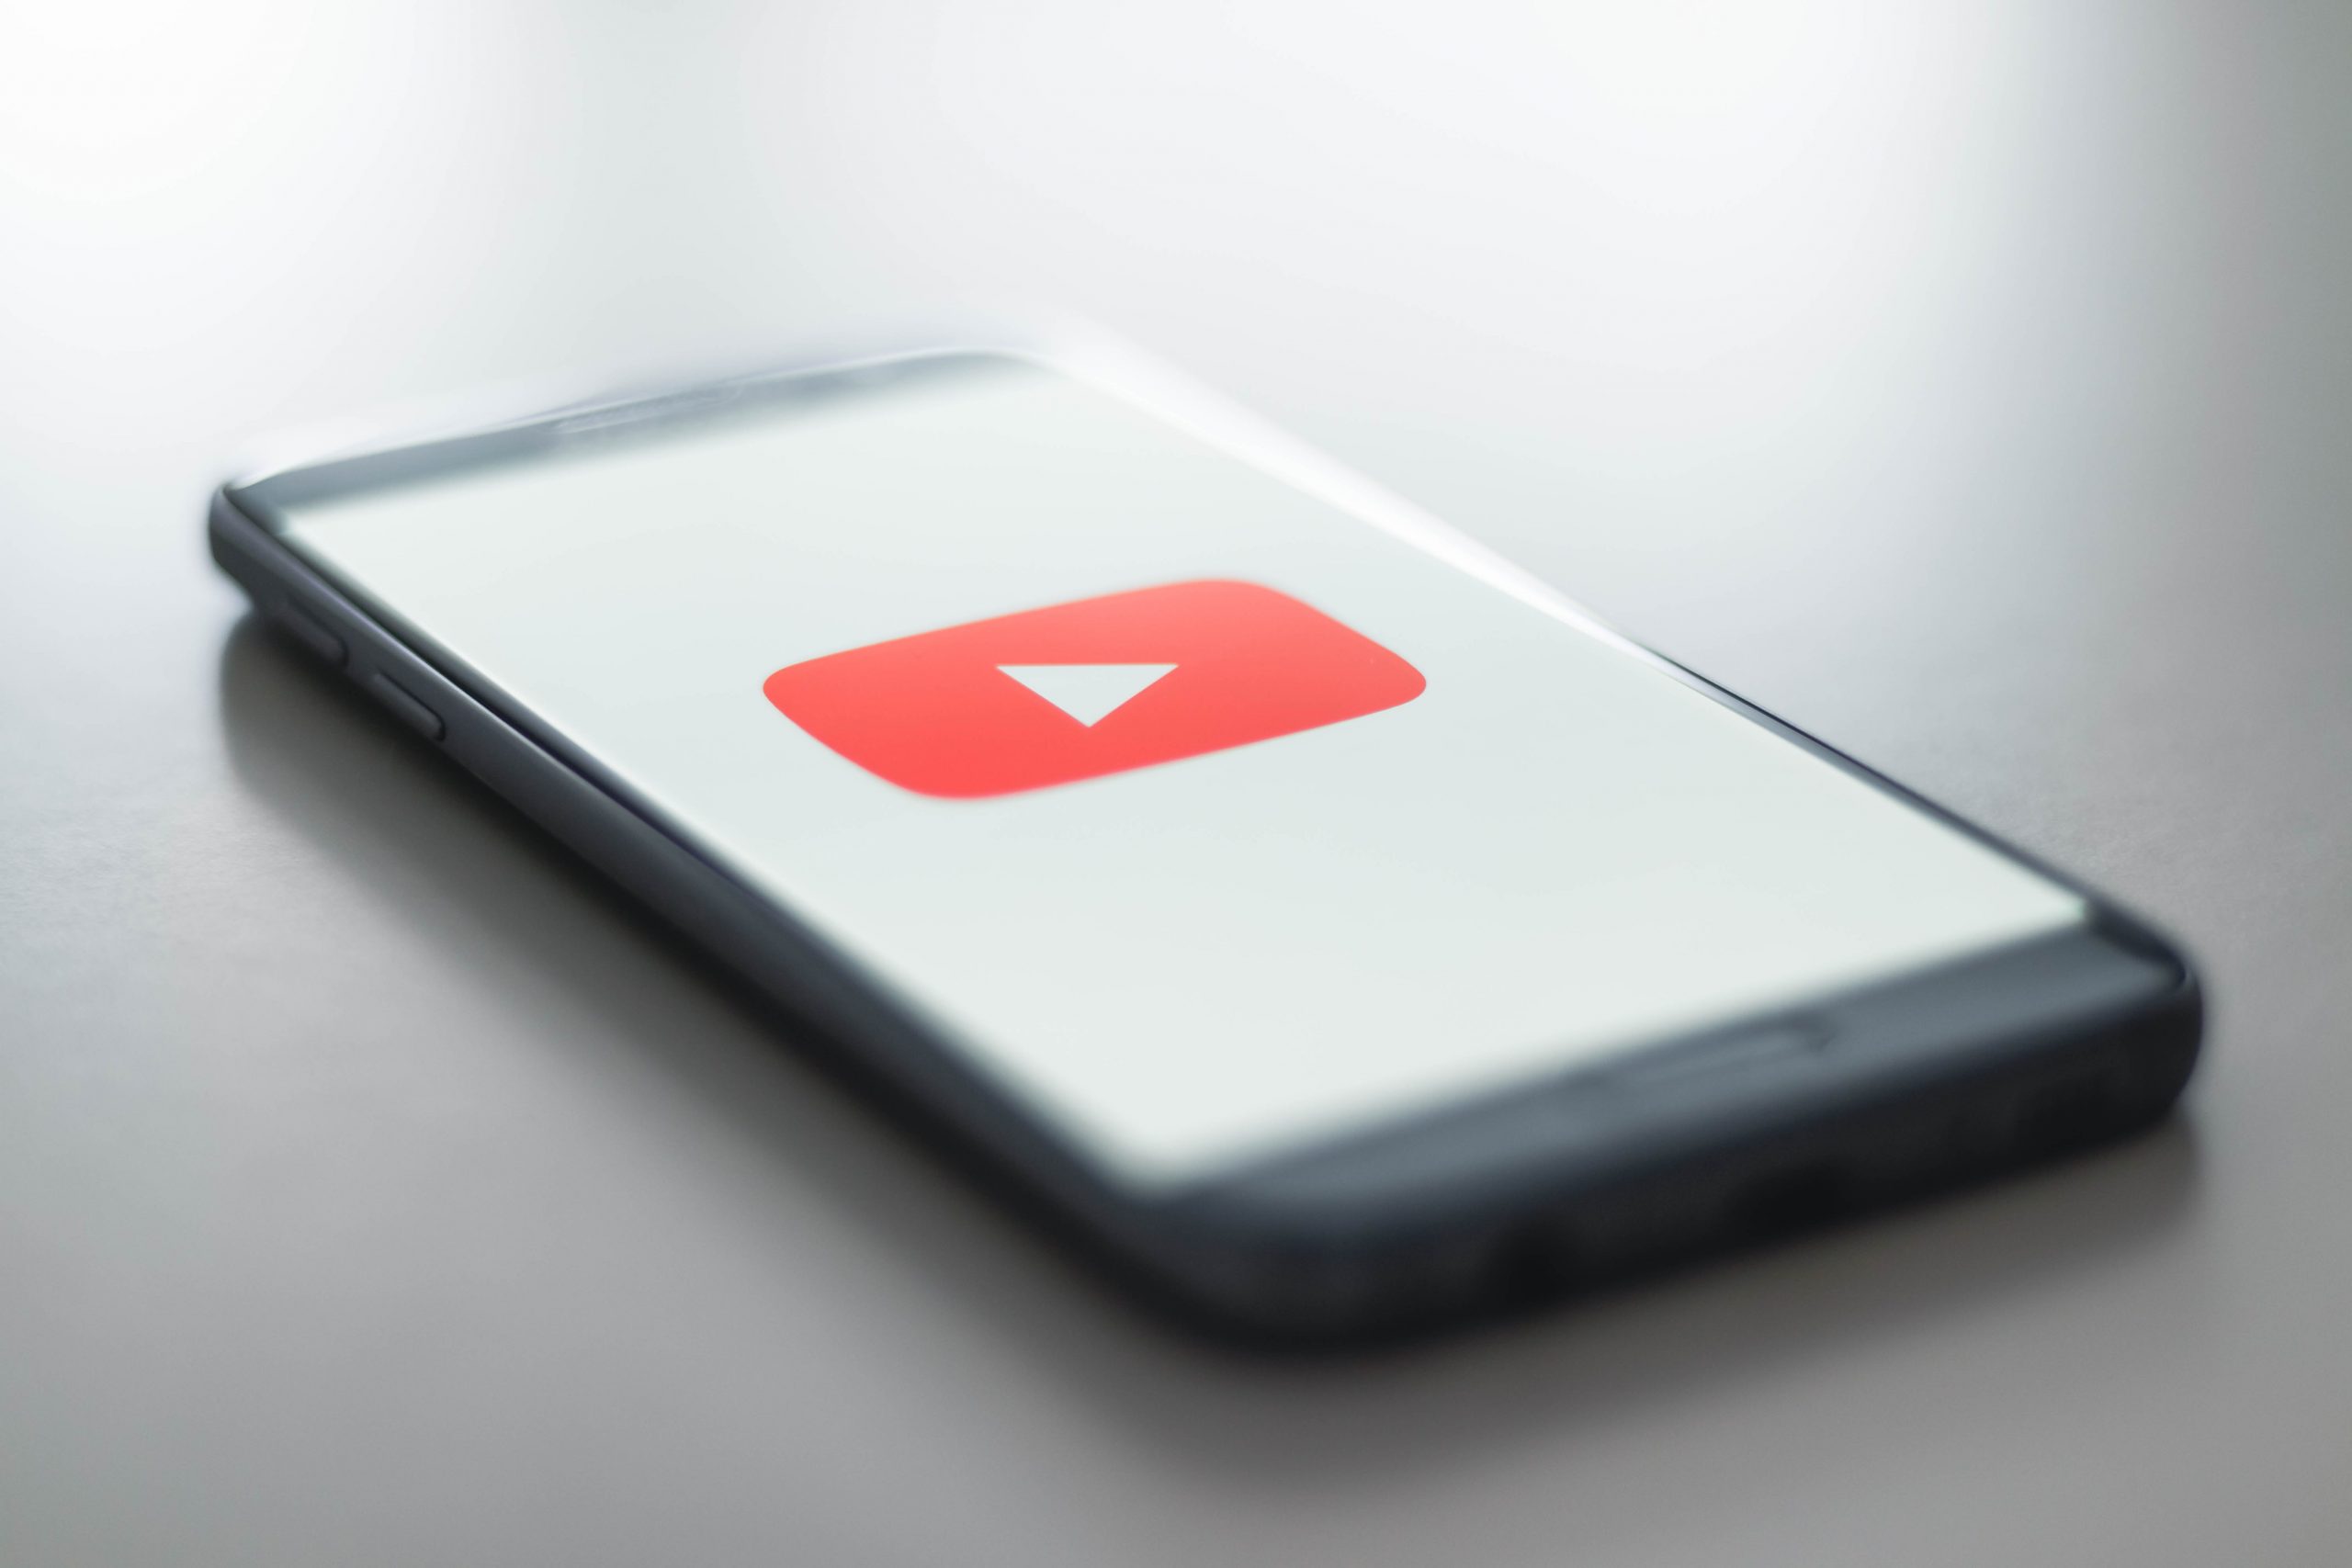 YouTube Vs TIKTOK: Is YouTube Better Than TIKTok at Promoting Your Video Content?